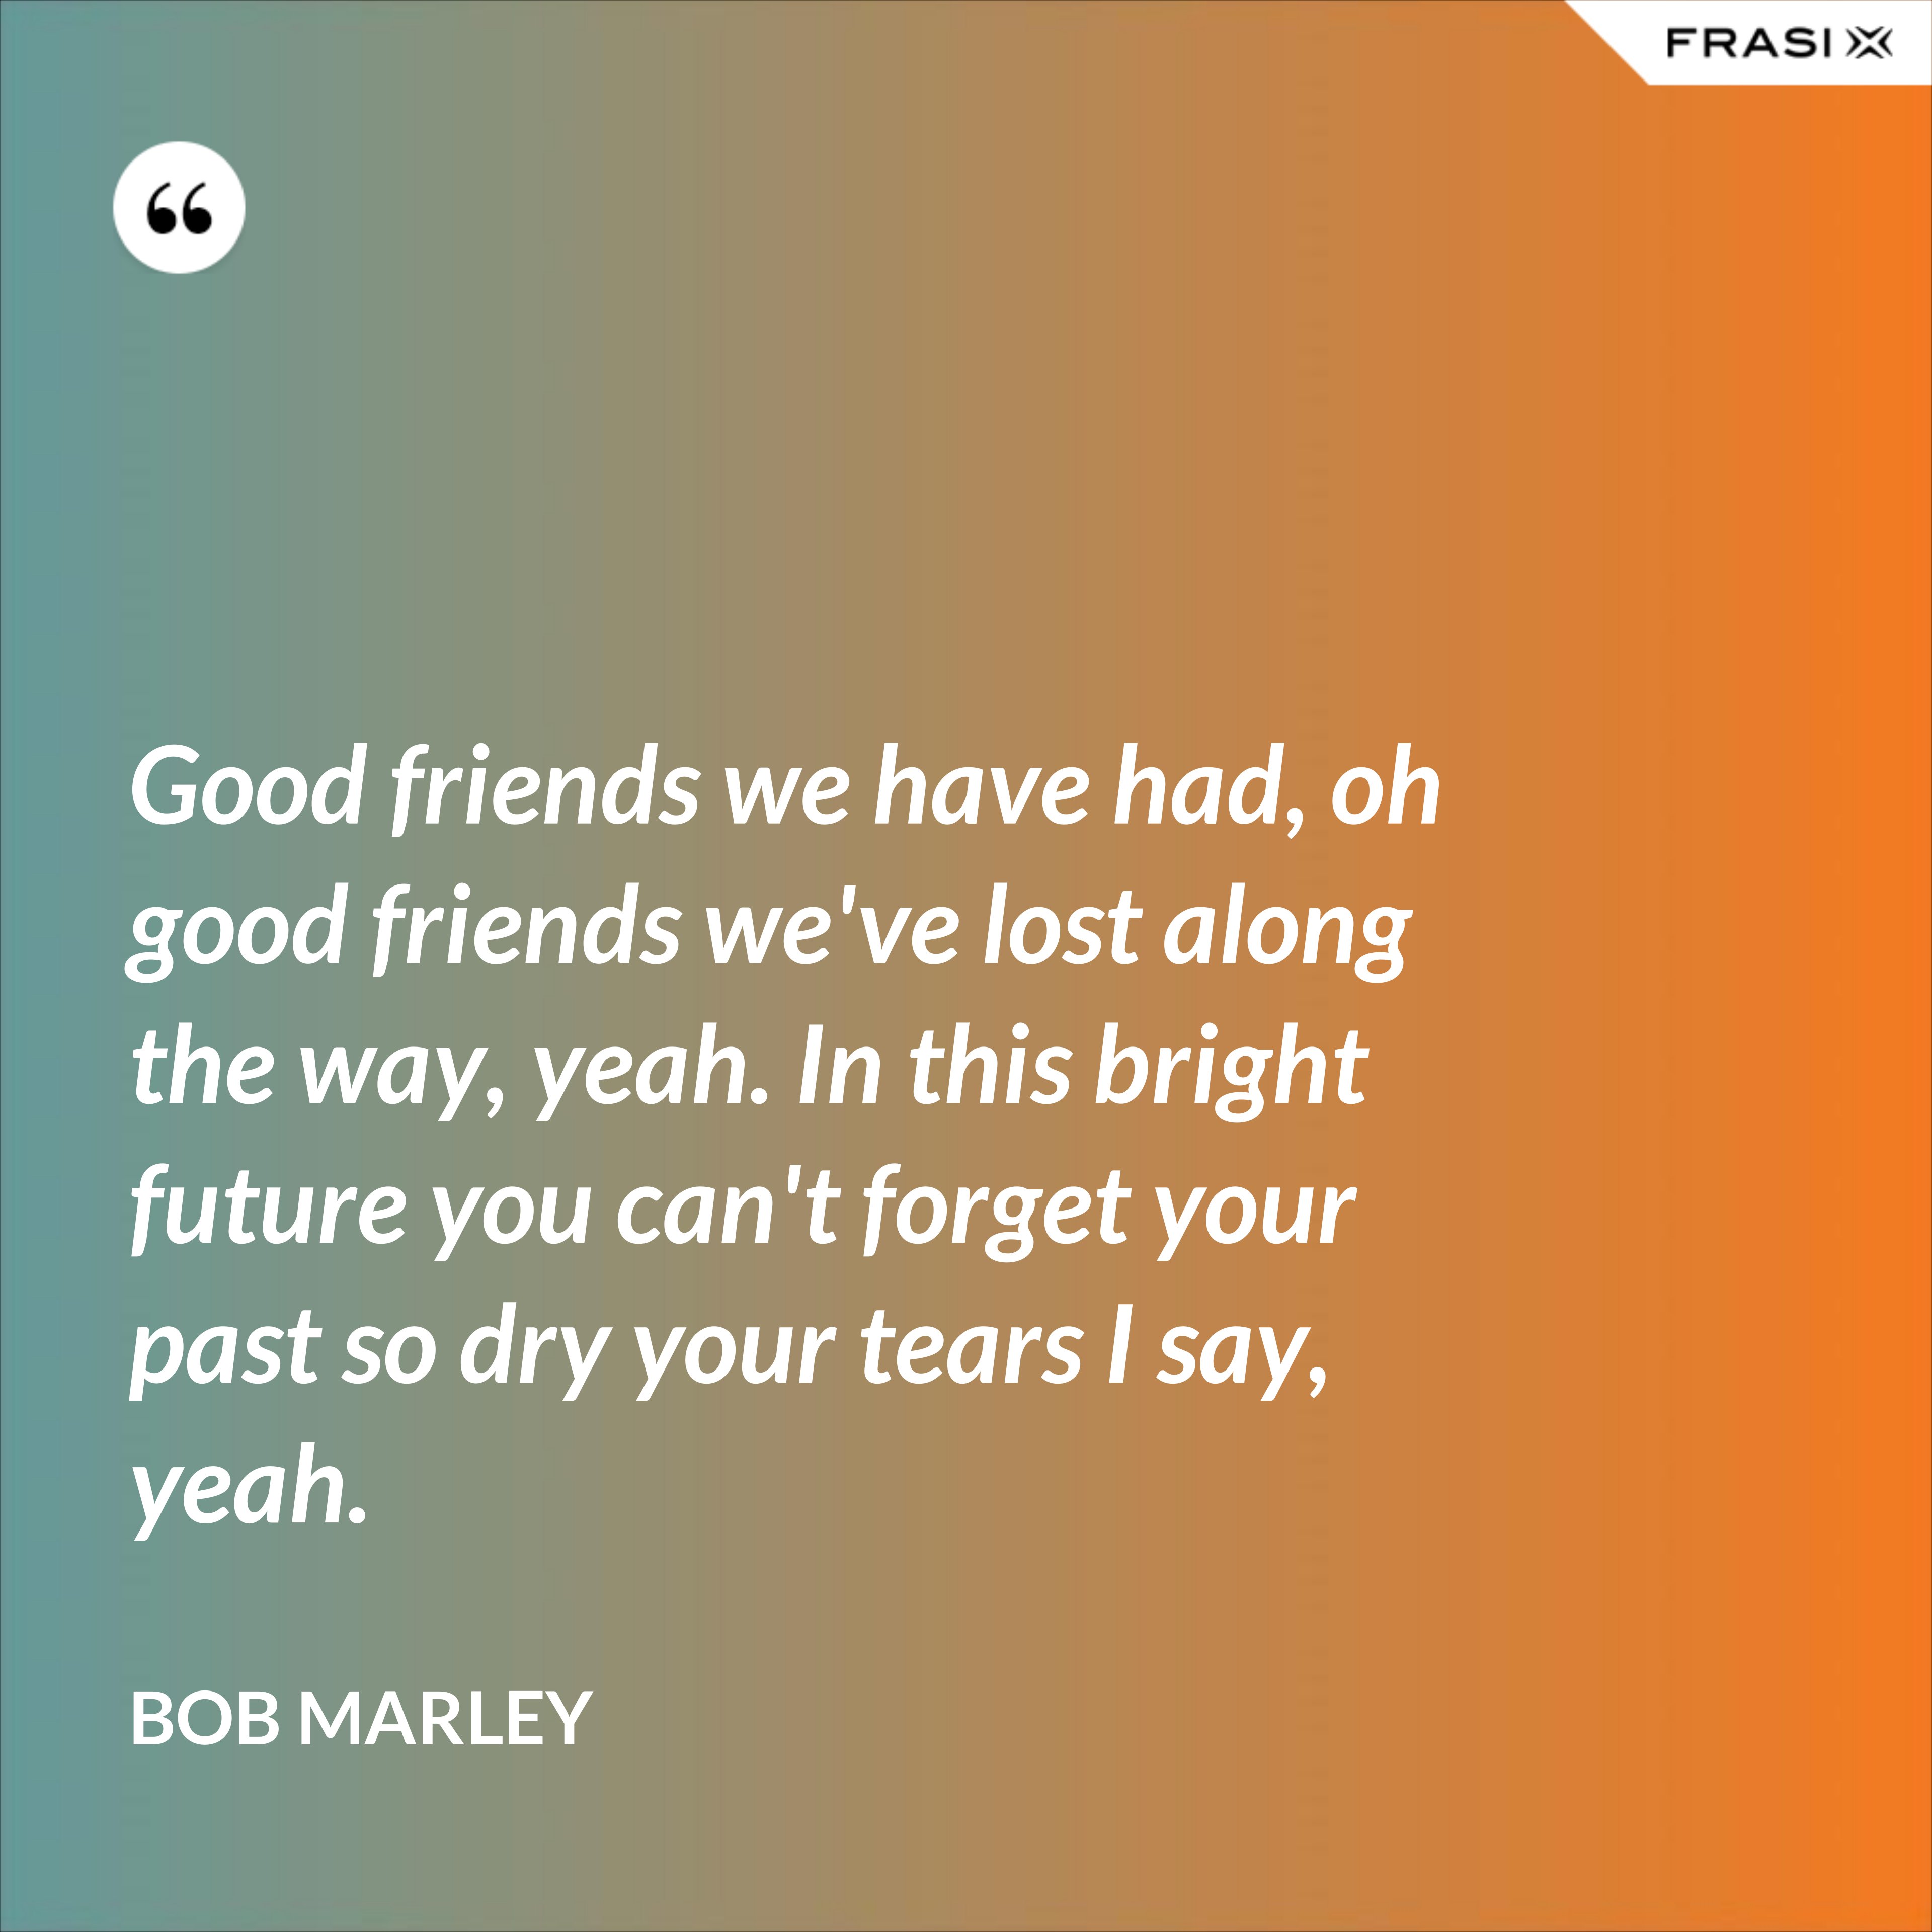 Good friends we have had, oh good friends we've lost along the way, yeah. In this bright future you can't forget your past so dry your tears I say, yeah. - Bob Marley